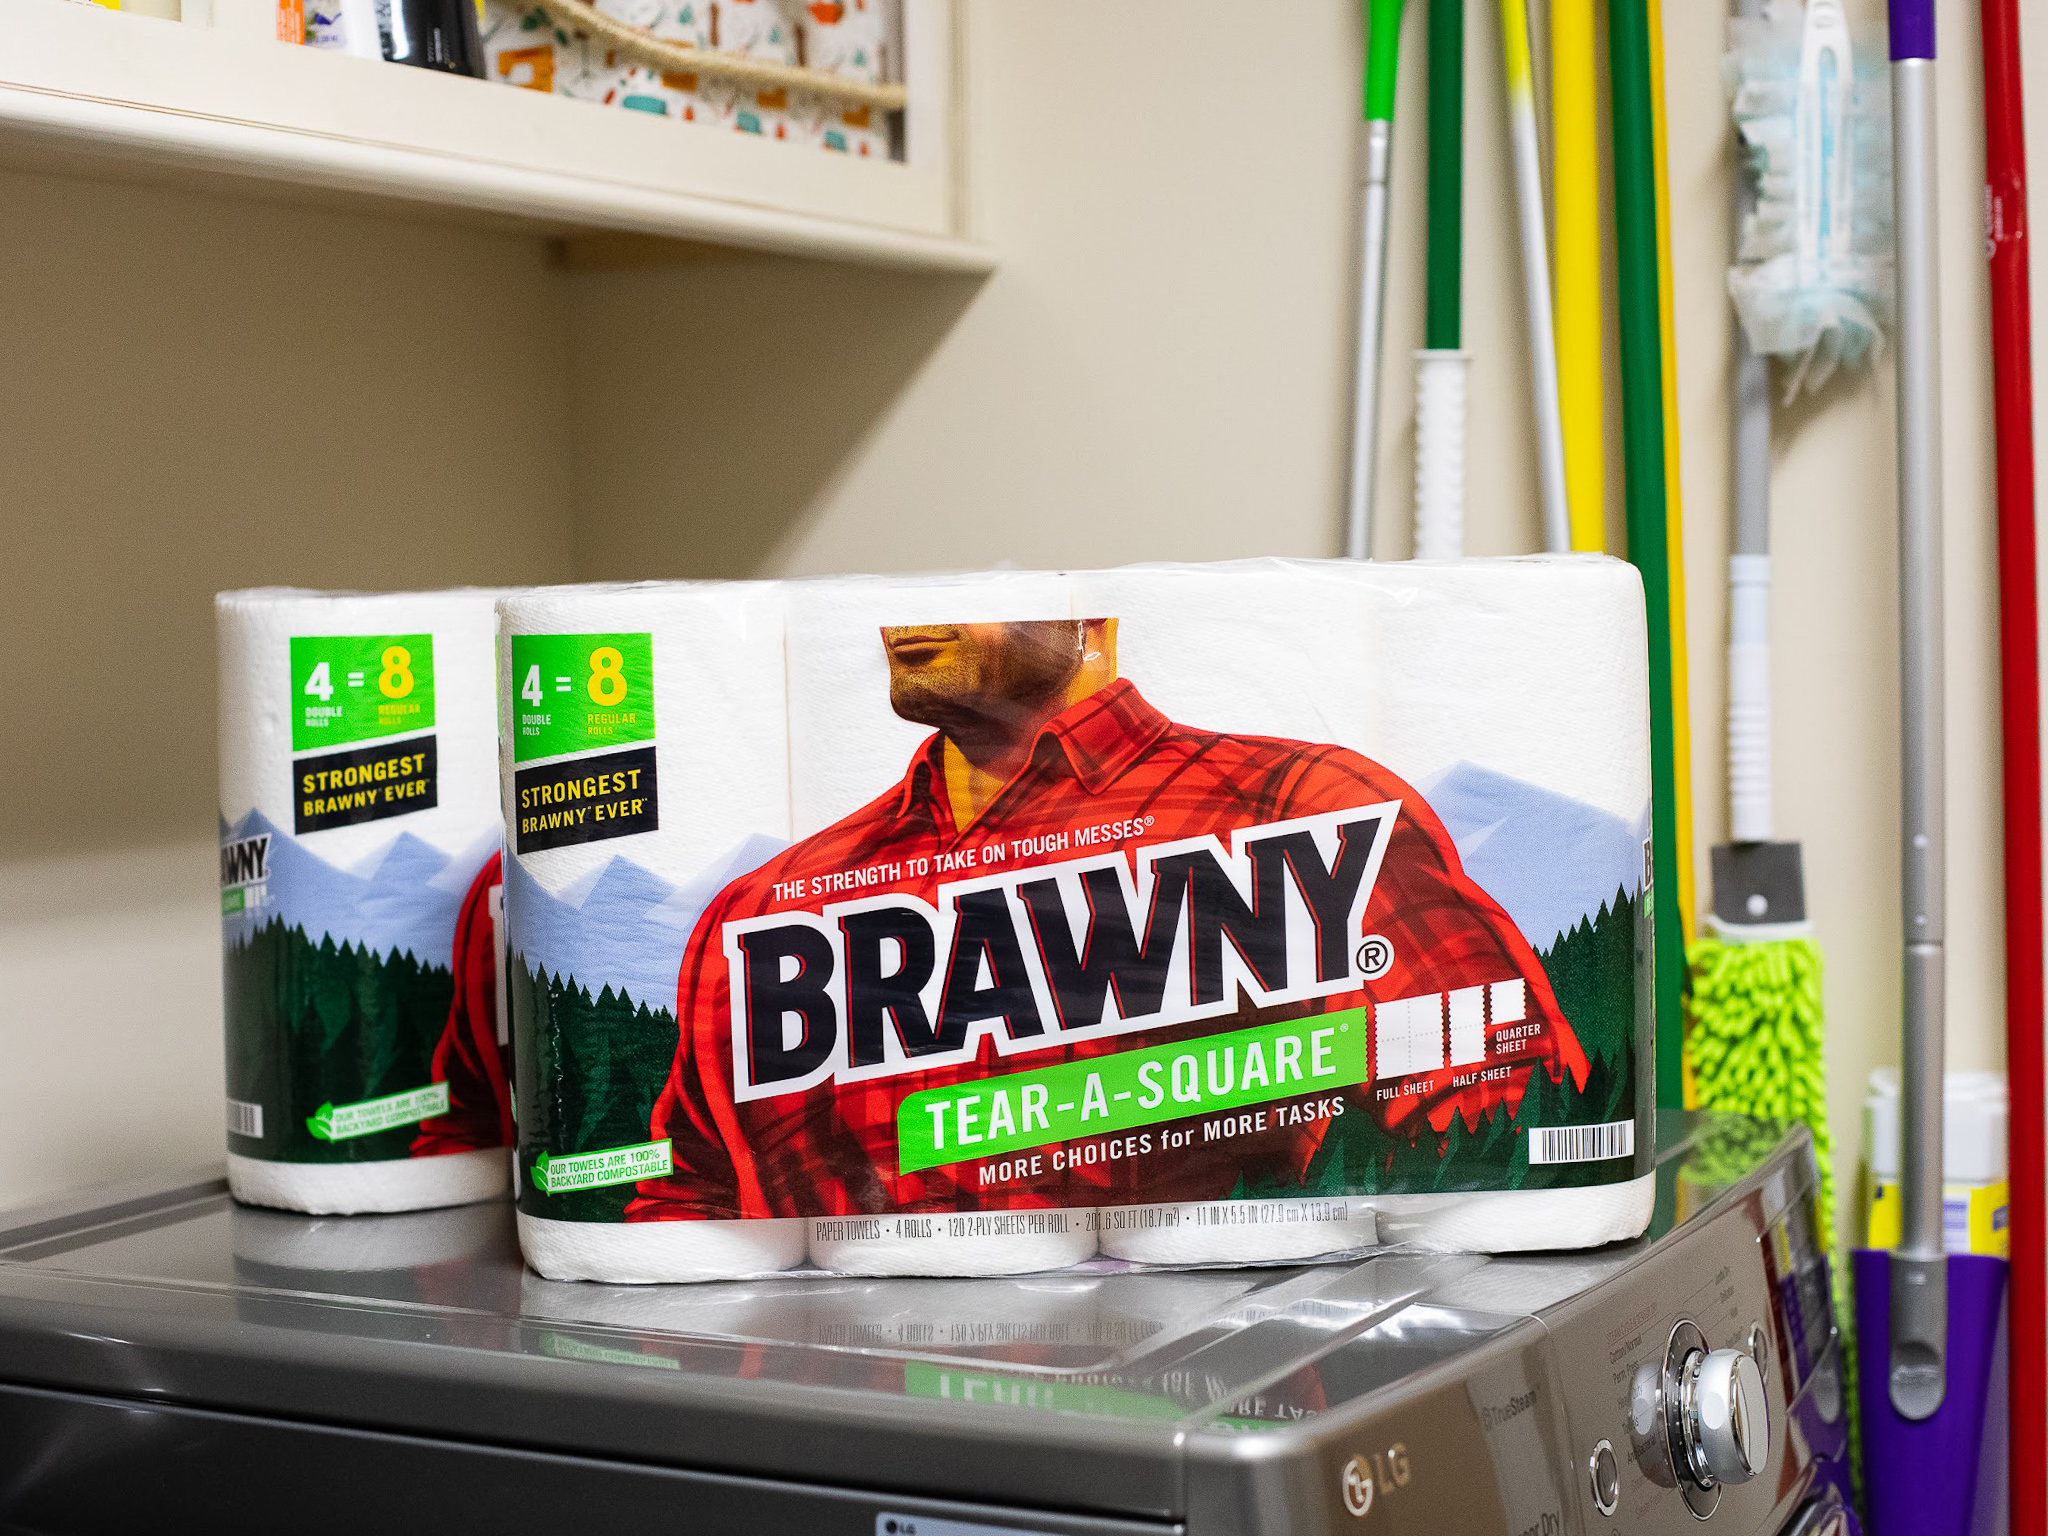 Brawny Paper Towels Are Just $5 At Publix (Regular Price $10.99!) – Deal Ends Soon!